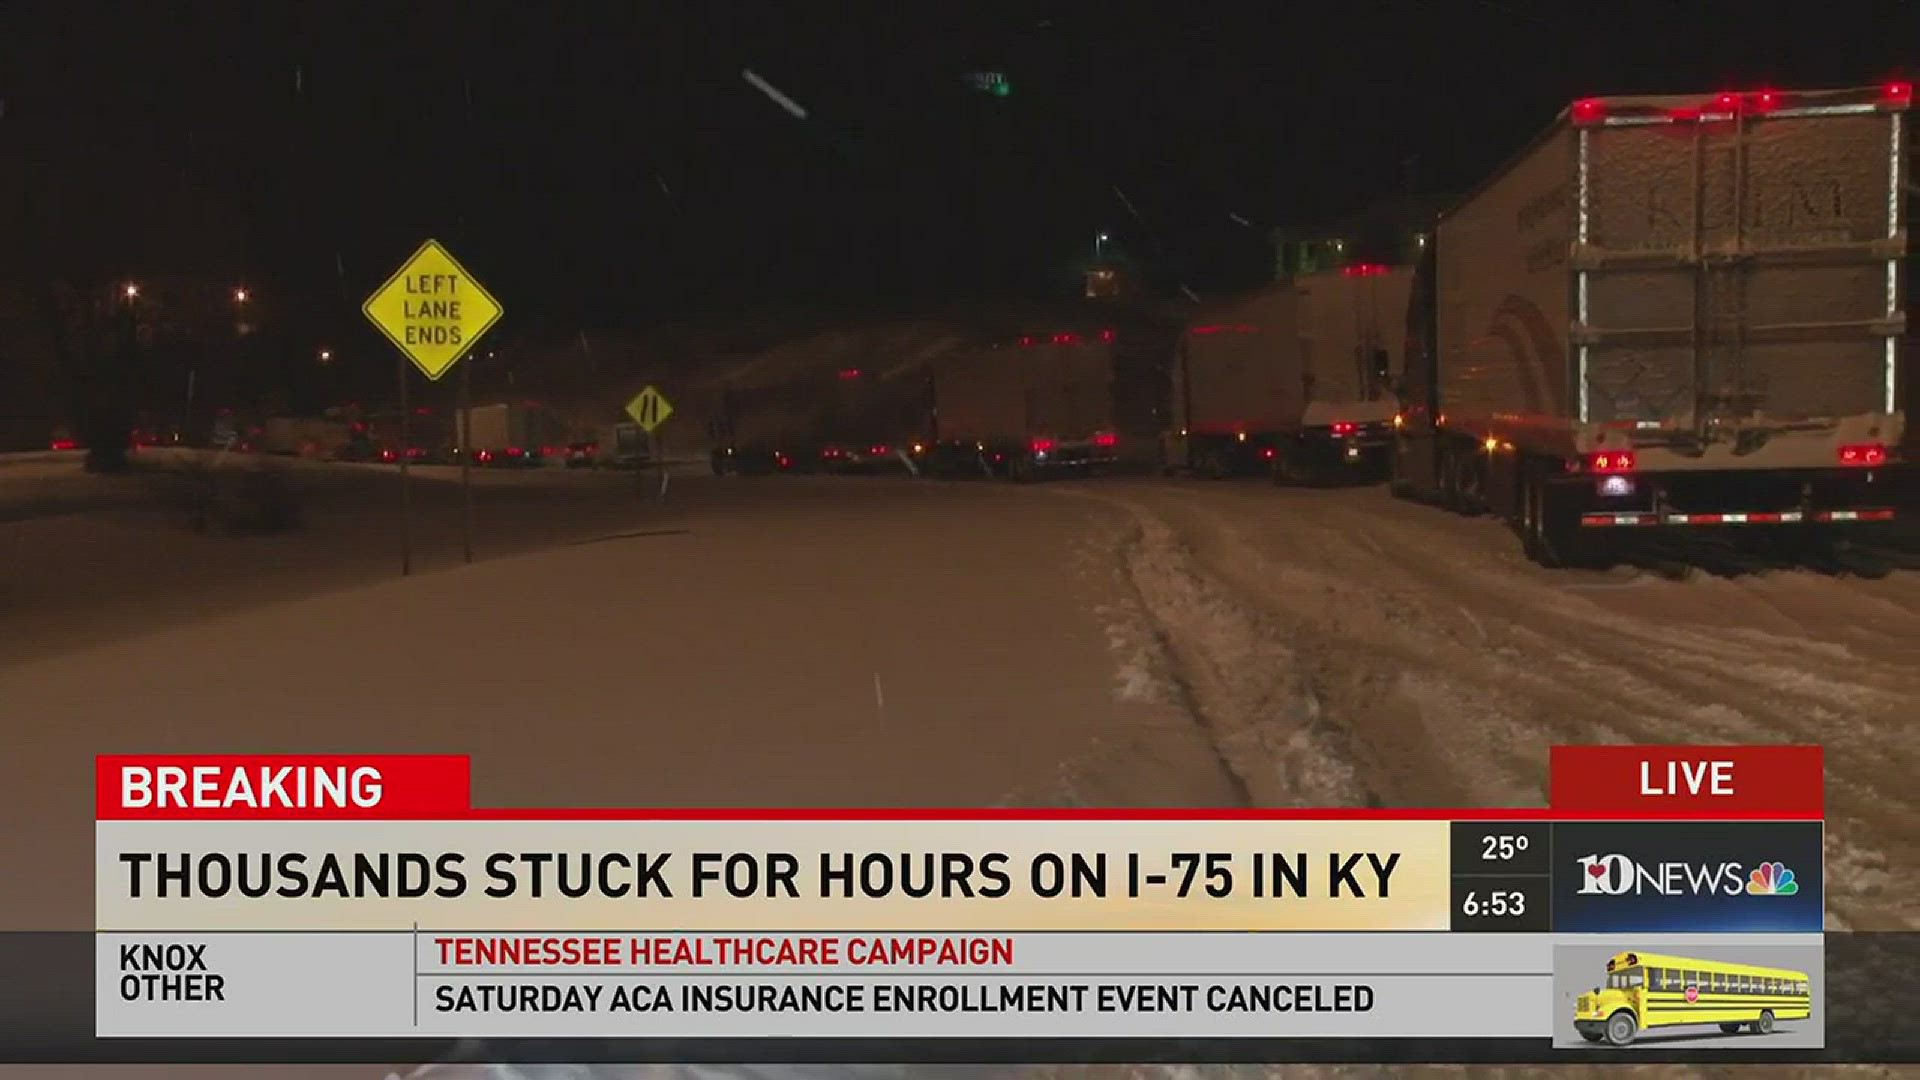 Kentucky State police say thousands have been in a standstill on Interstate 75 for more than 15 hours.